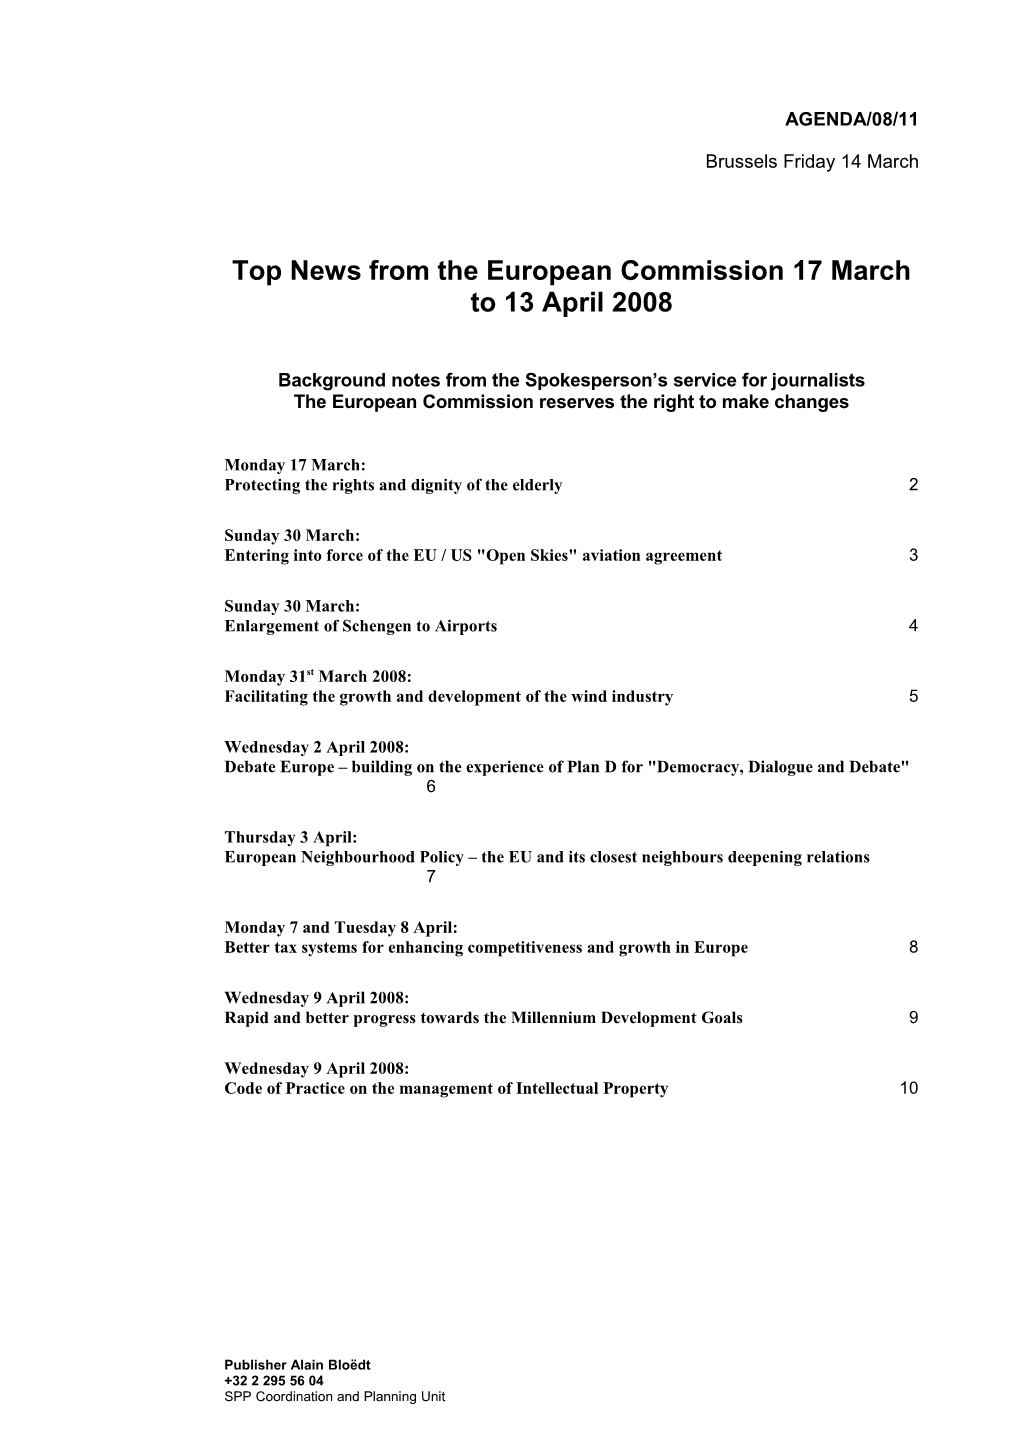 Top News from the European Commission17march to 13 April 2008